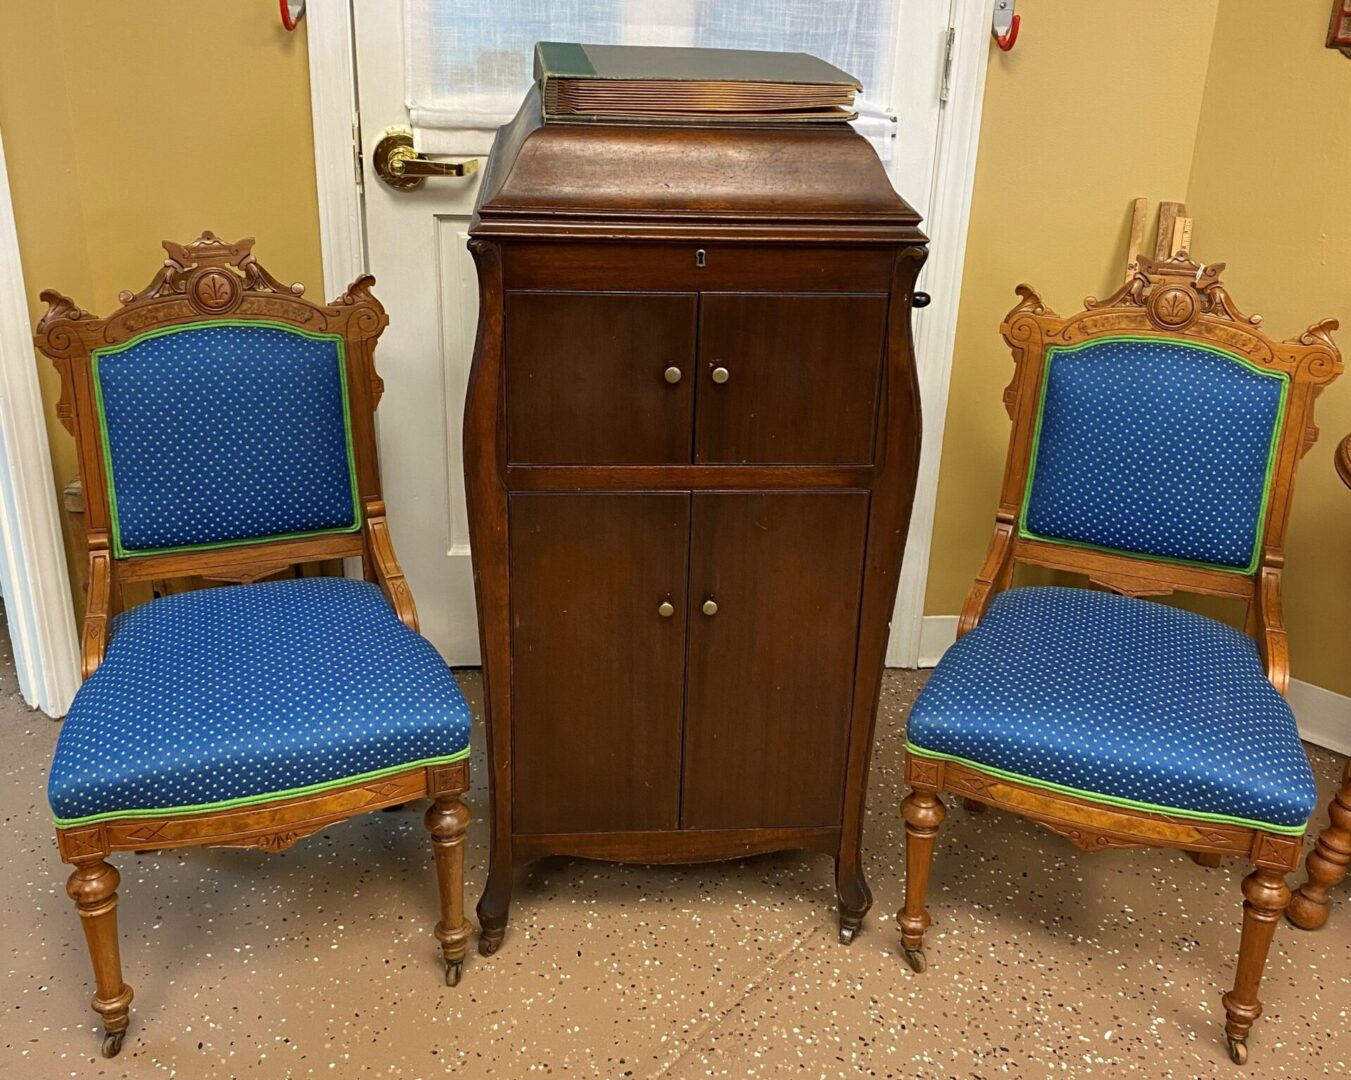 Two blue chairs and a cabinet in front of the door.